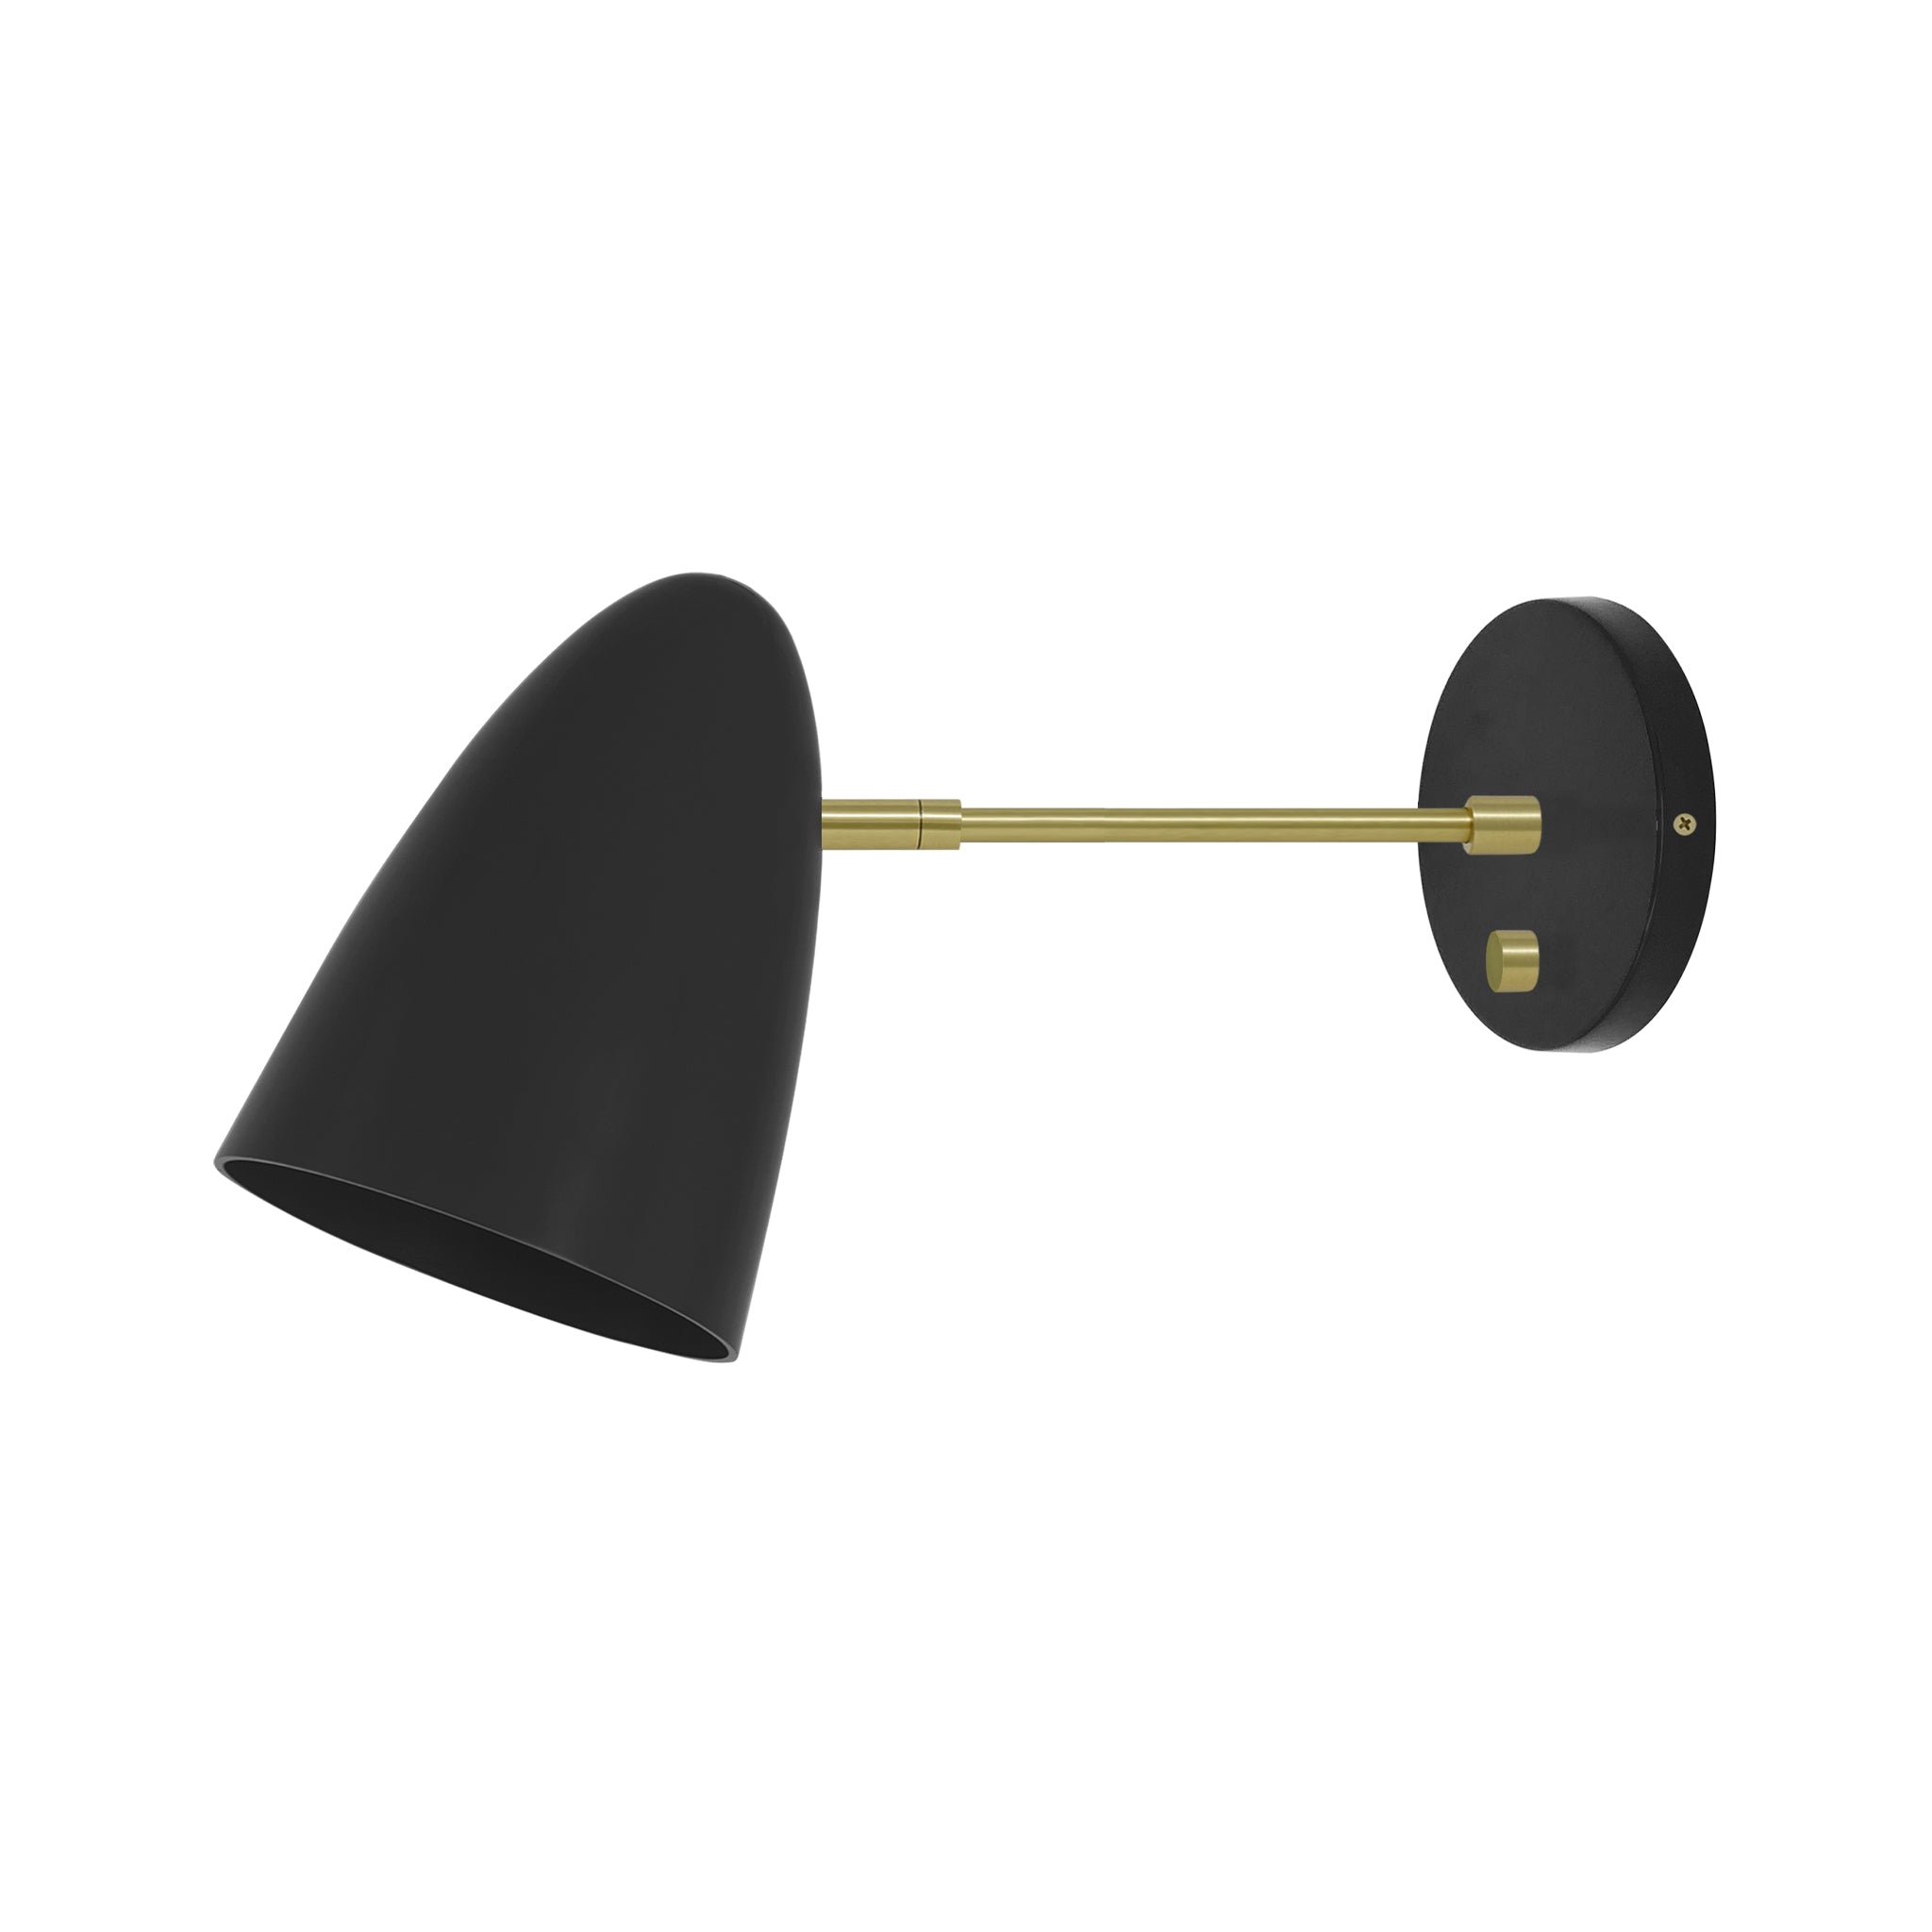 Brass and black color Boom sconce 6" arm Dutton Brown lighting